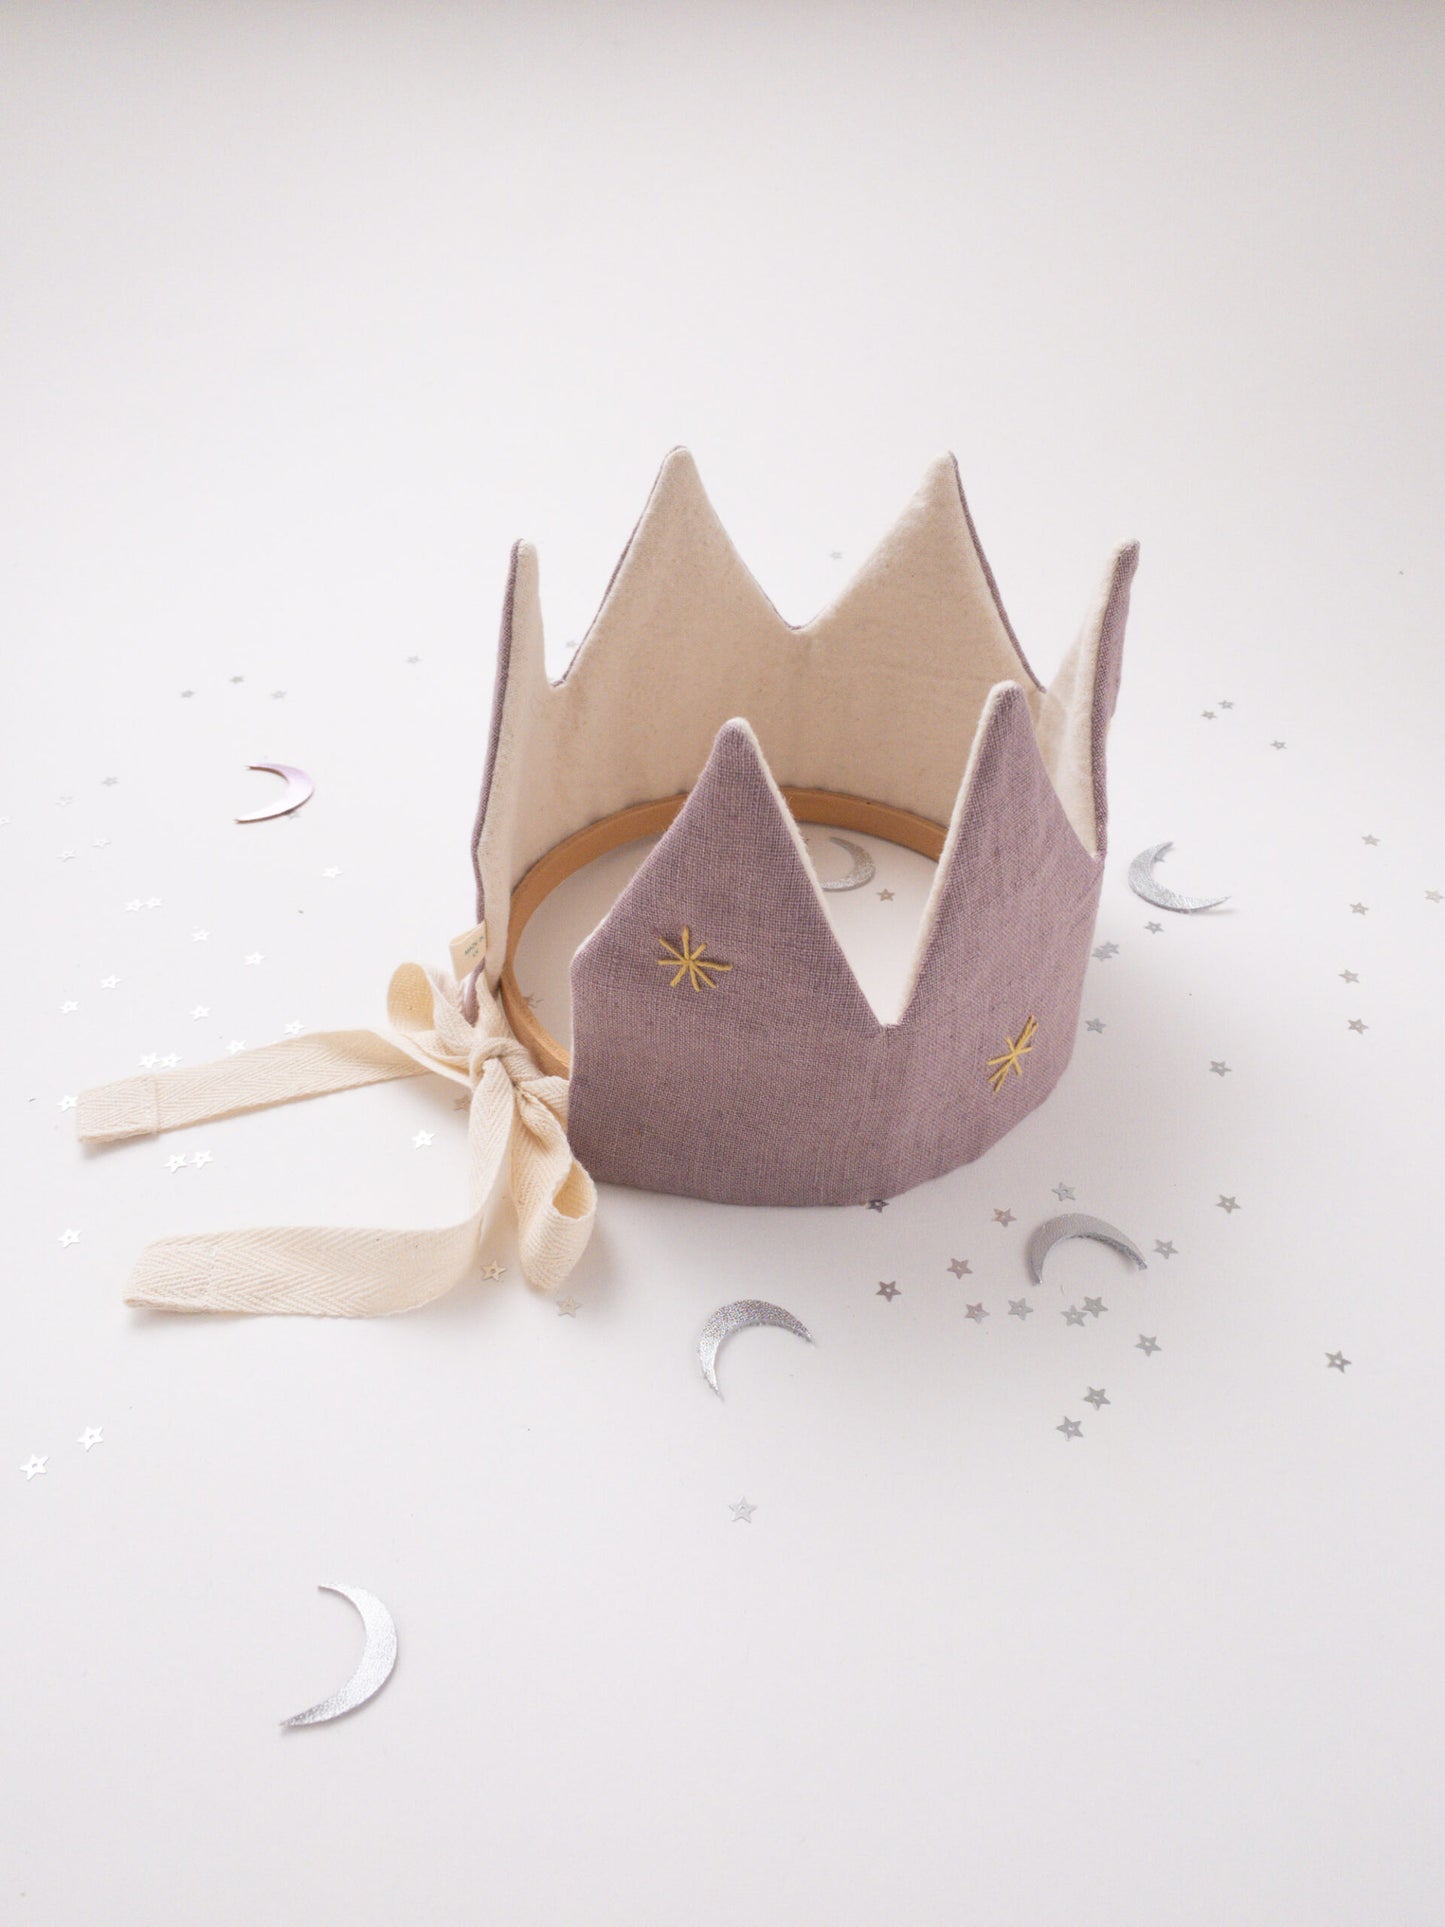 lilac crown with stars